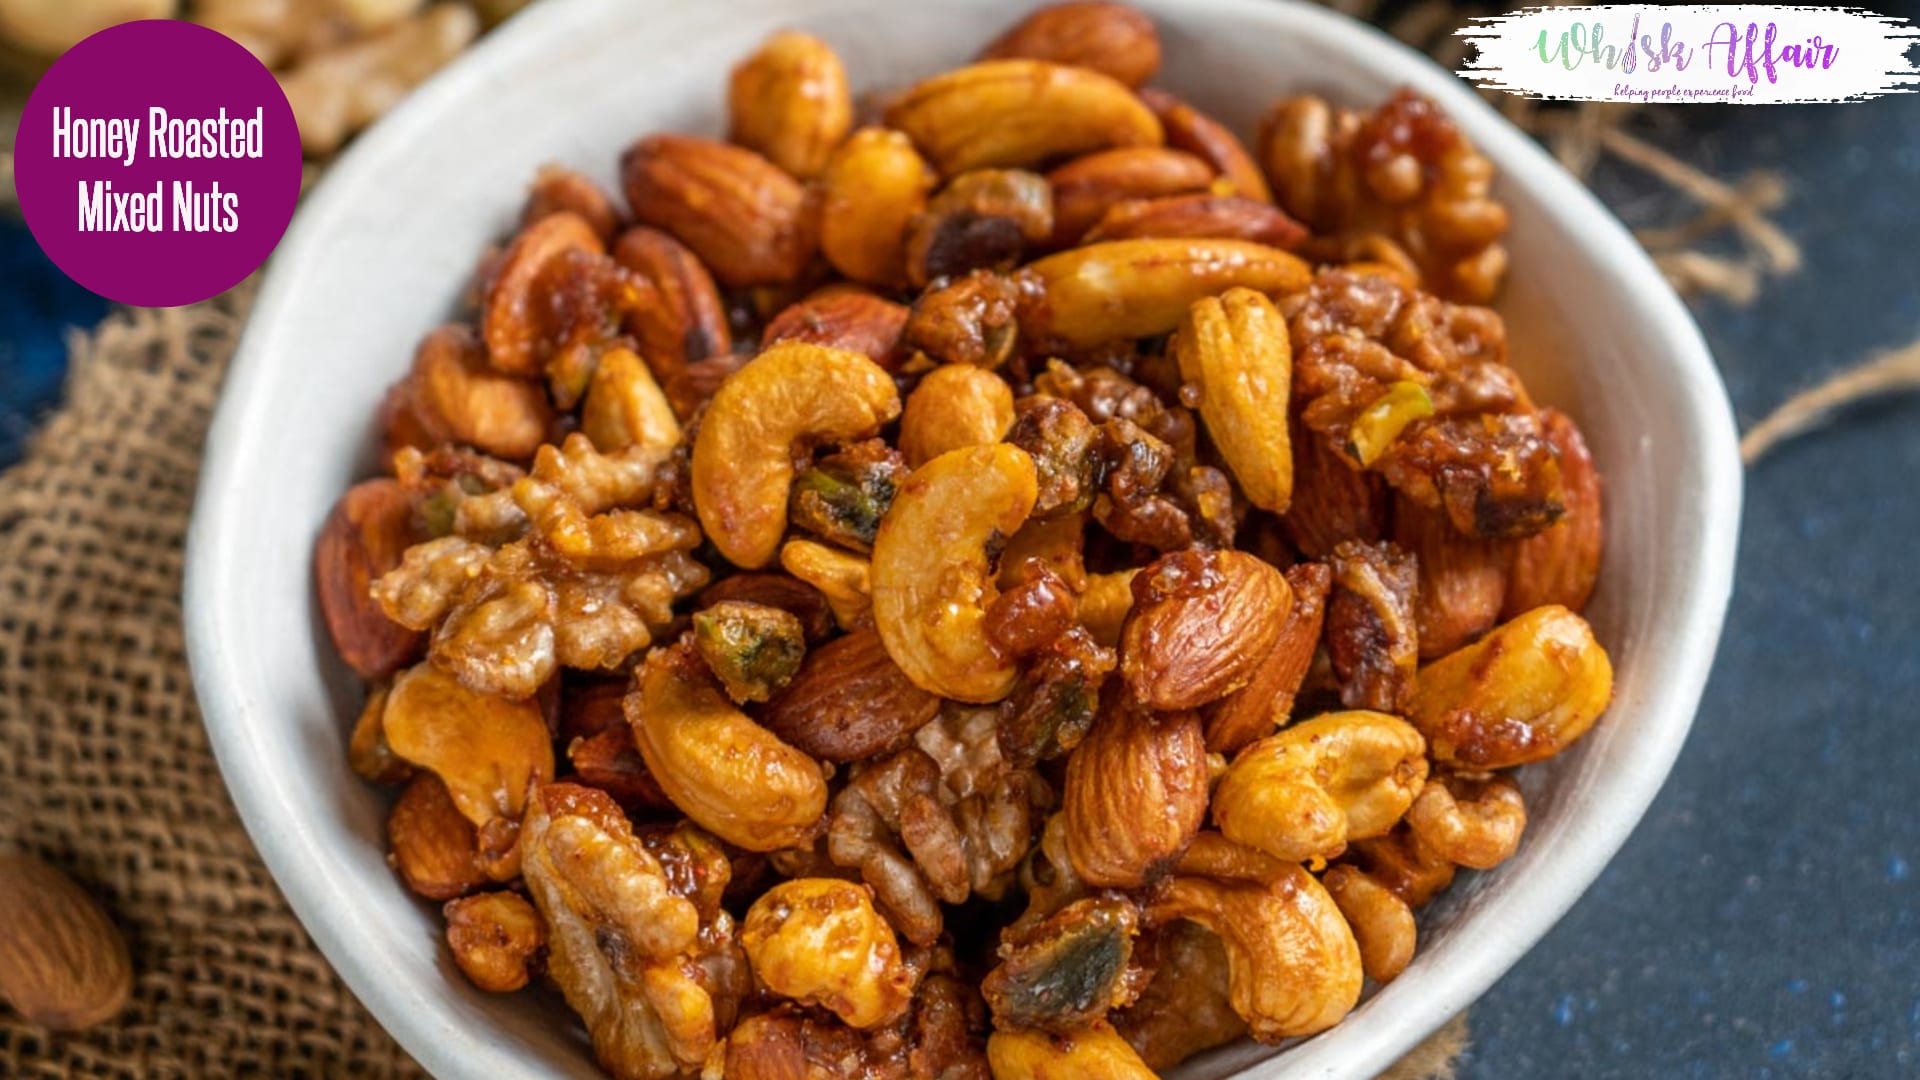 Mixed Nuts in Honey Recipe 🍯 Gift in a Jar Idea 🍯 Tasty Cooking Recipes 